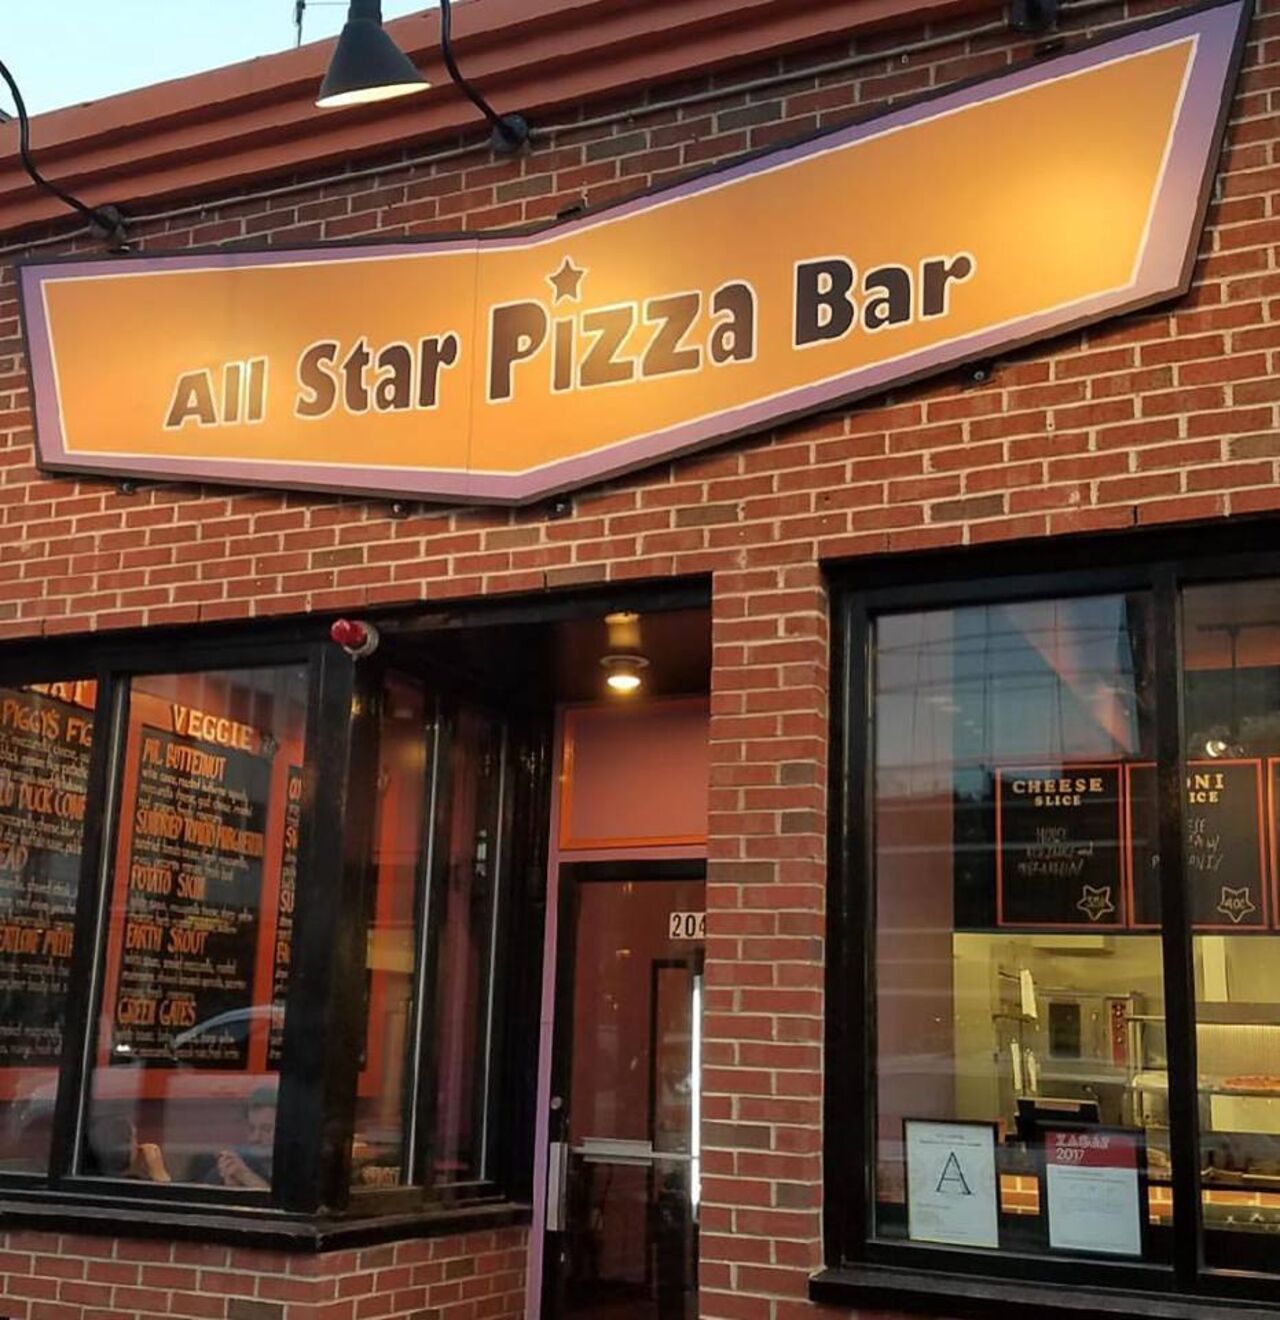 A photo of All Star Pizza Bar